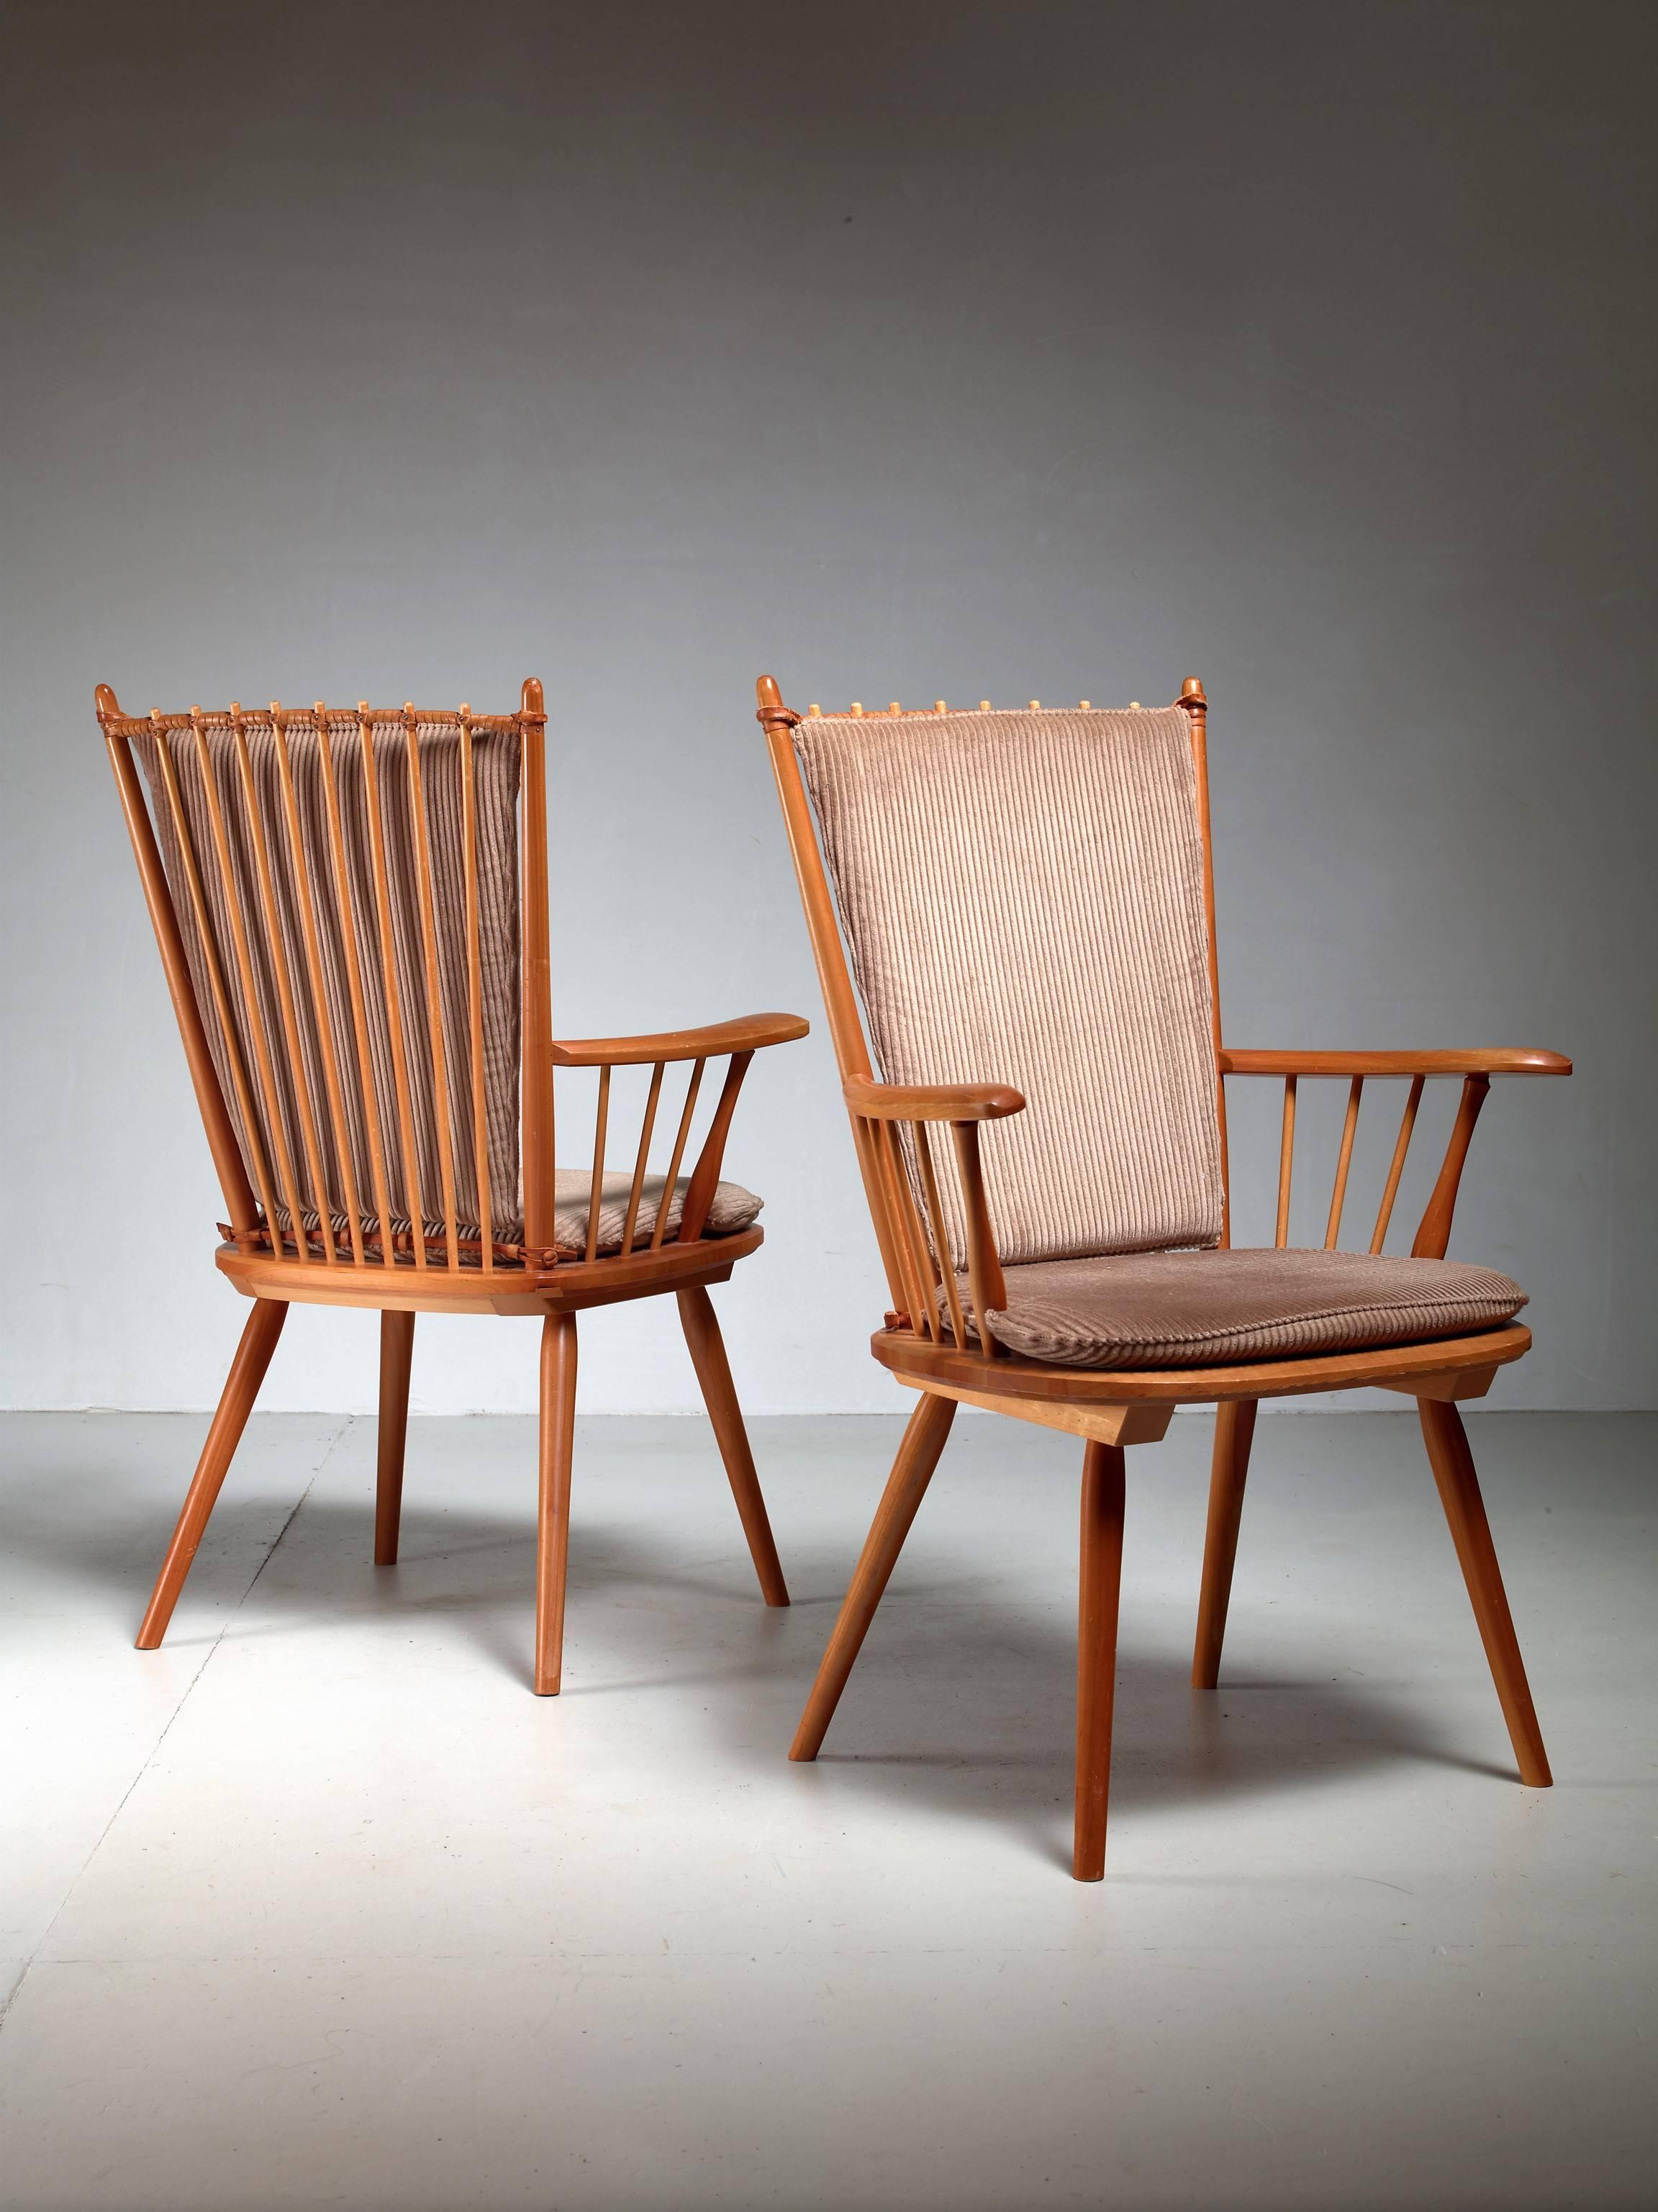 A pair of cherrywood arts and crafts chairs by Albert Haberer for Hermann Fleiner, Stuttgart, circa 1950.
The chairs have loose taupe fabric cushions. The flexible backrest is made of thin spindles, held together with a leather connection. The